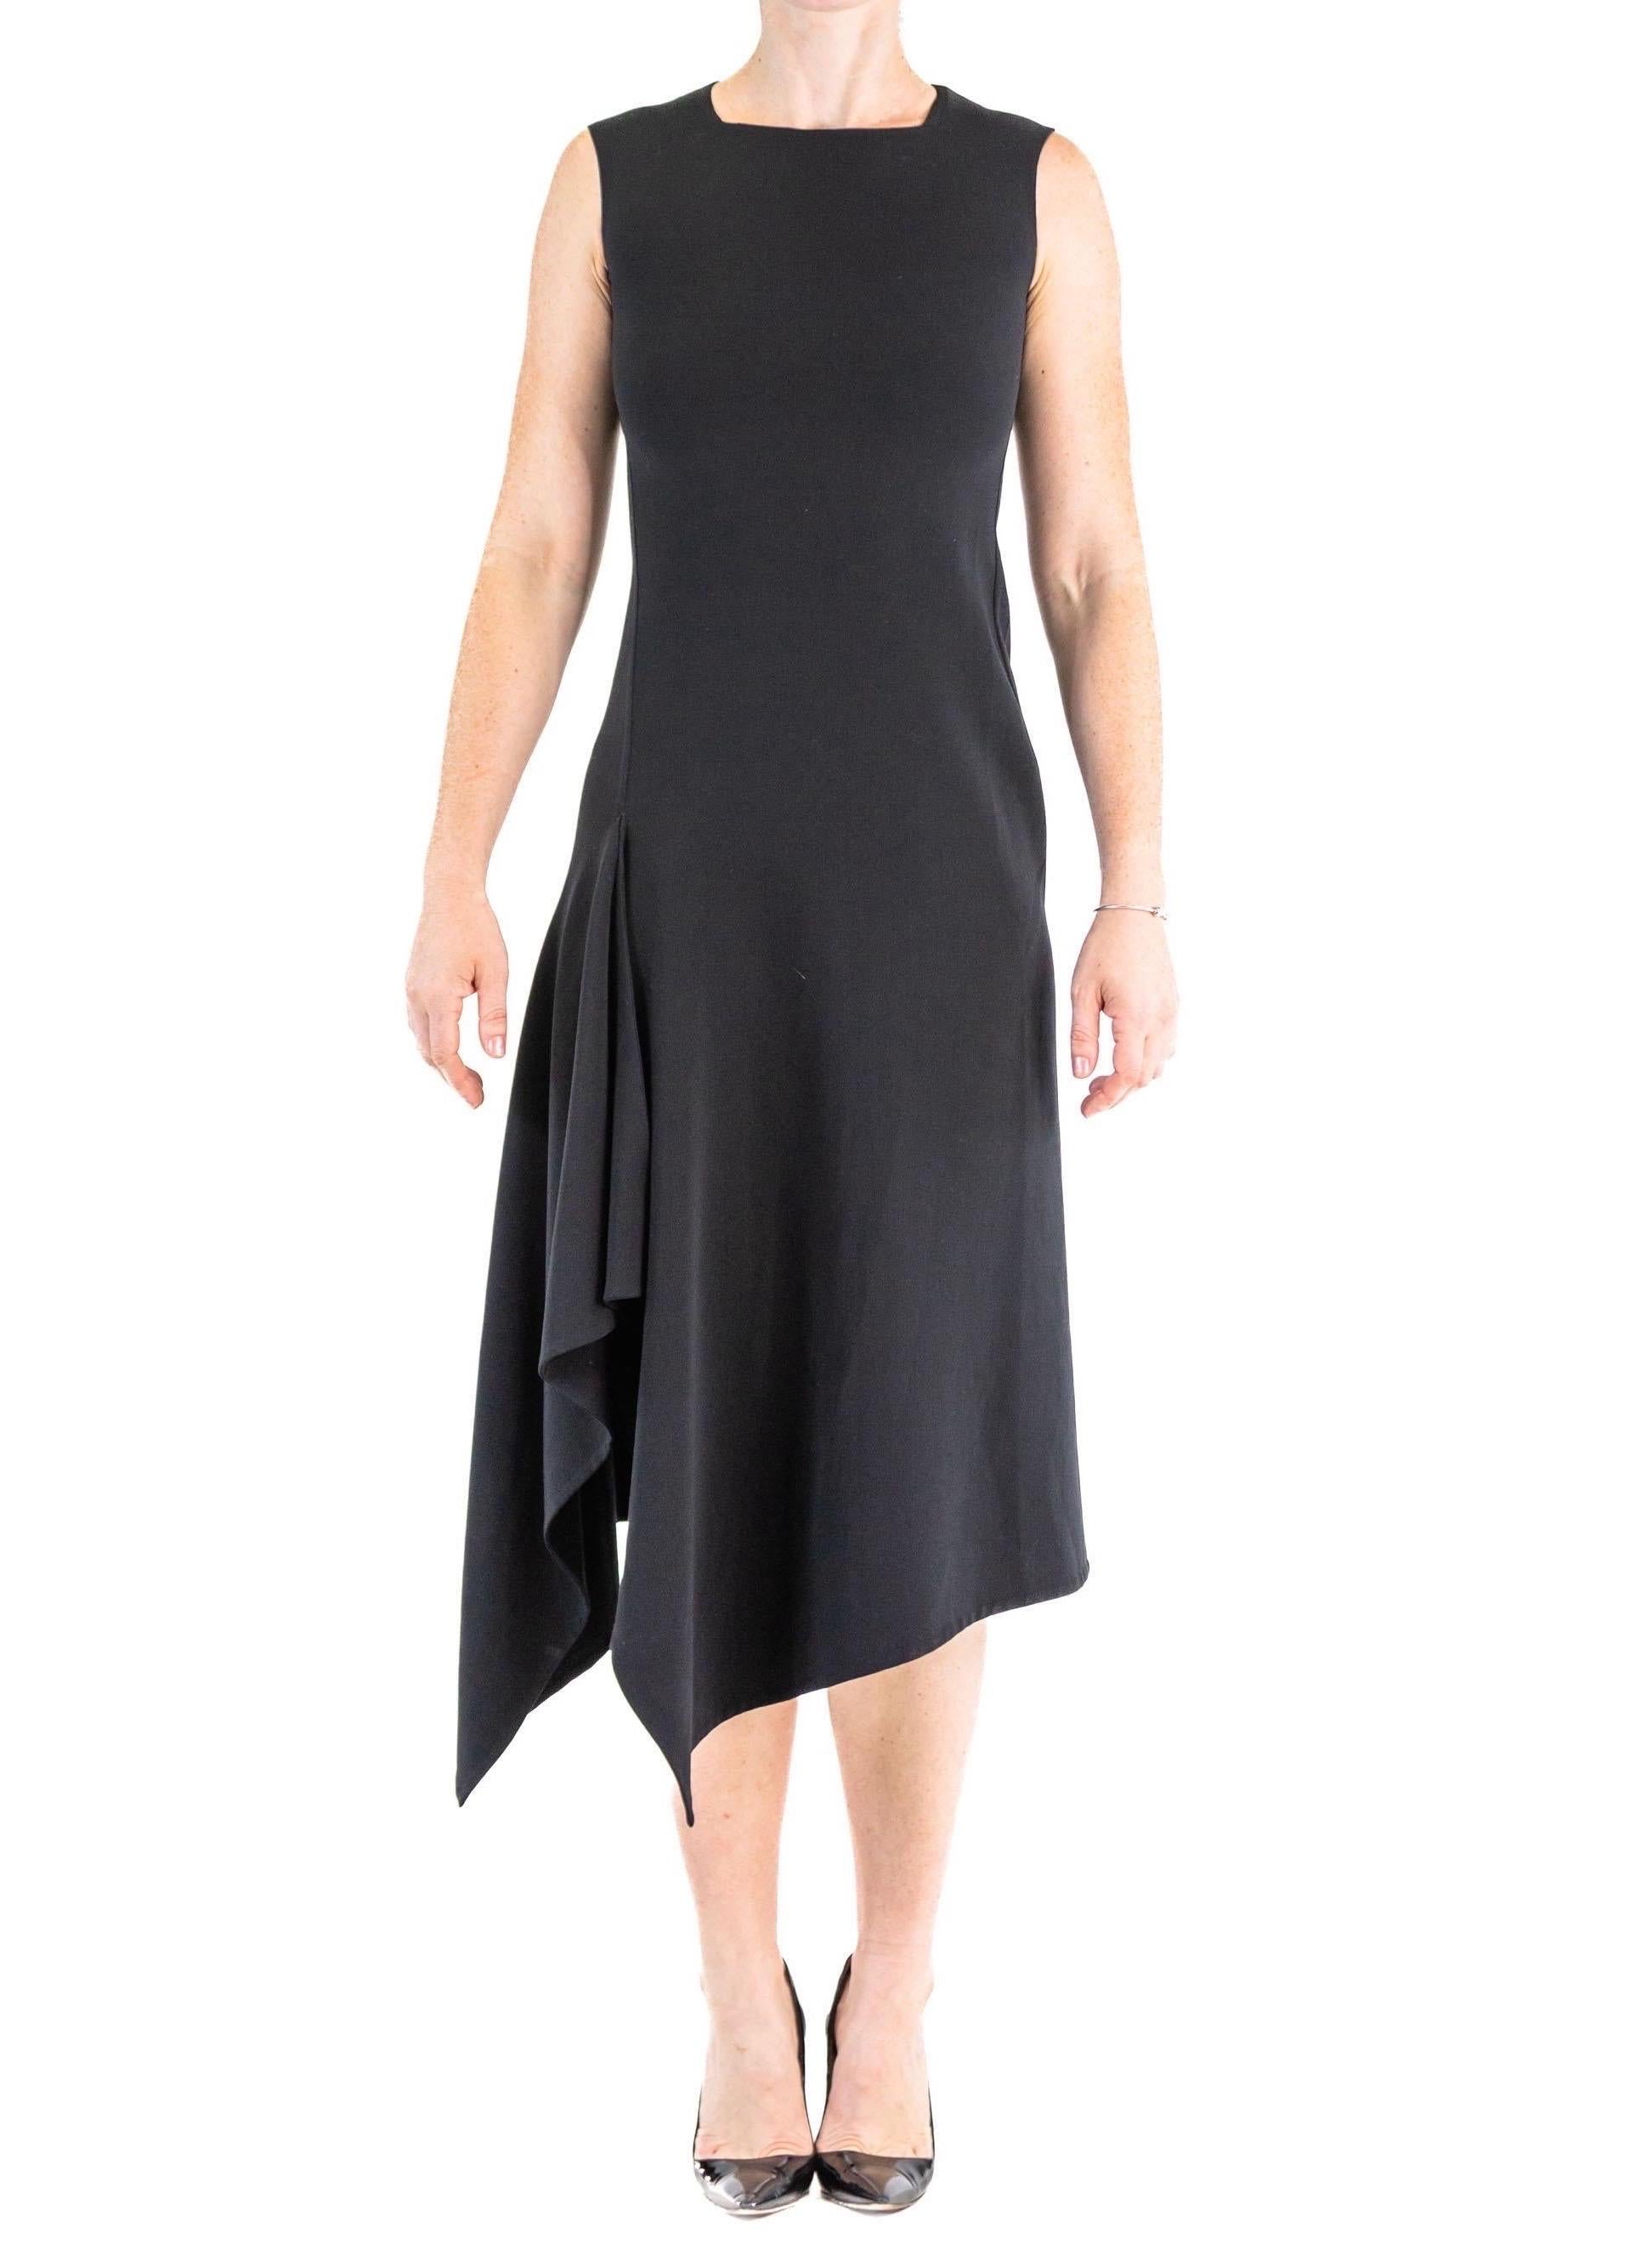 2000S DONNA KARAN Black Wool Blend Stretch High Side Slit Modernist Gown In Excellent Condition For Sale In New York, NY